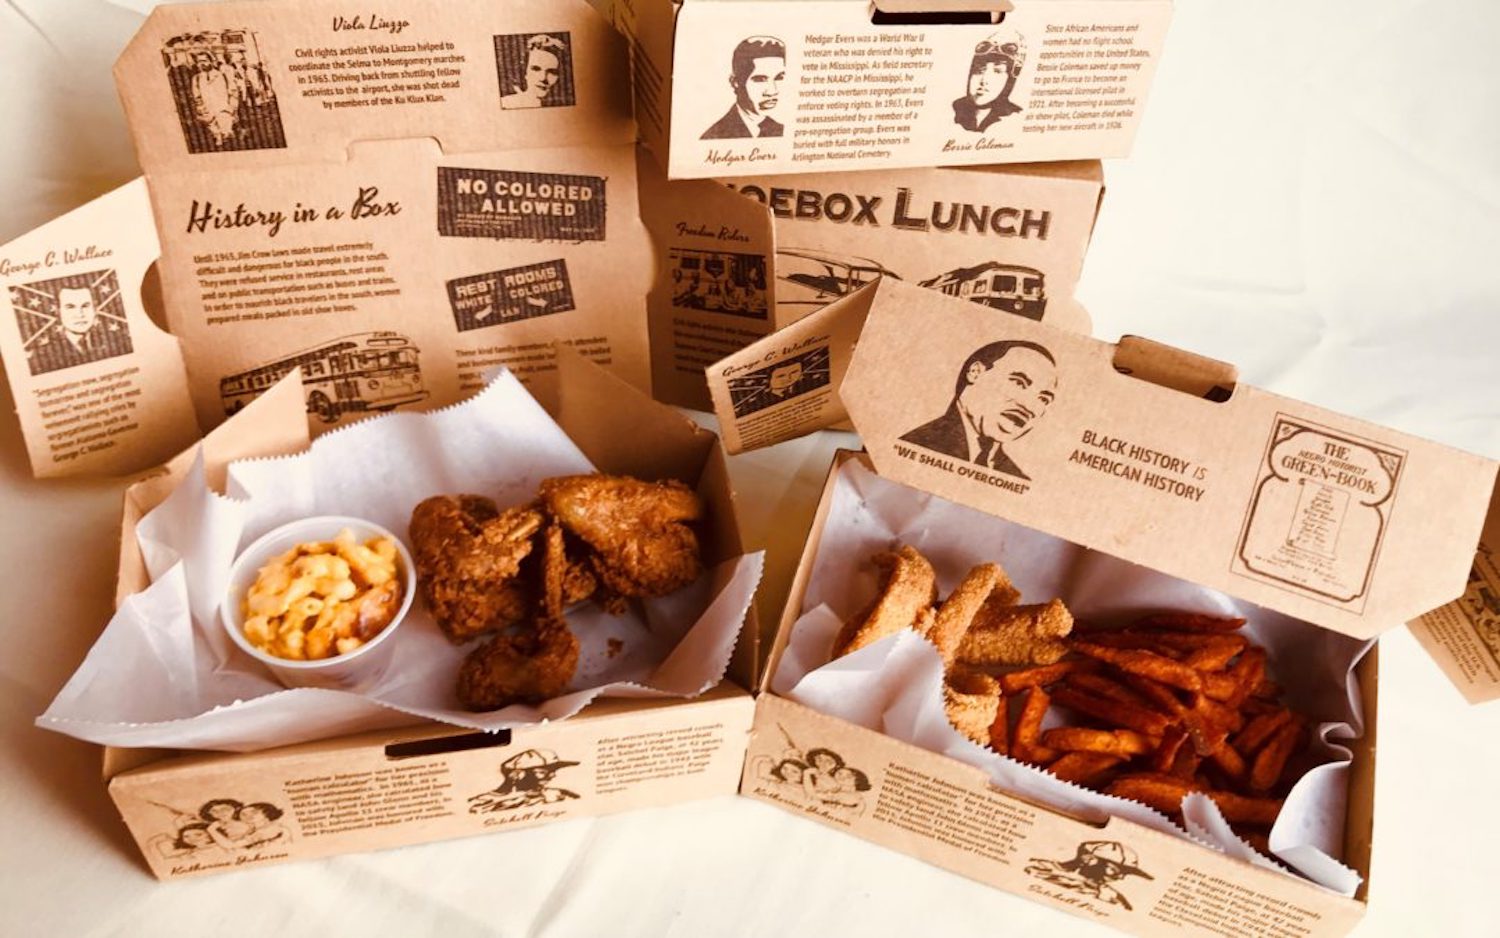 This Soul Food Restaurant is Serving Lessons In Black History With “Shoebox Lunches” | Black Enterprise